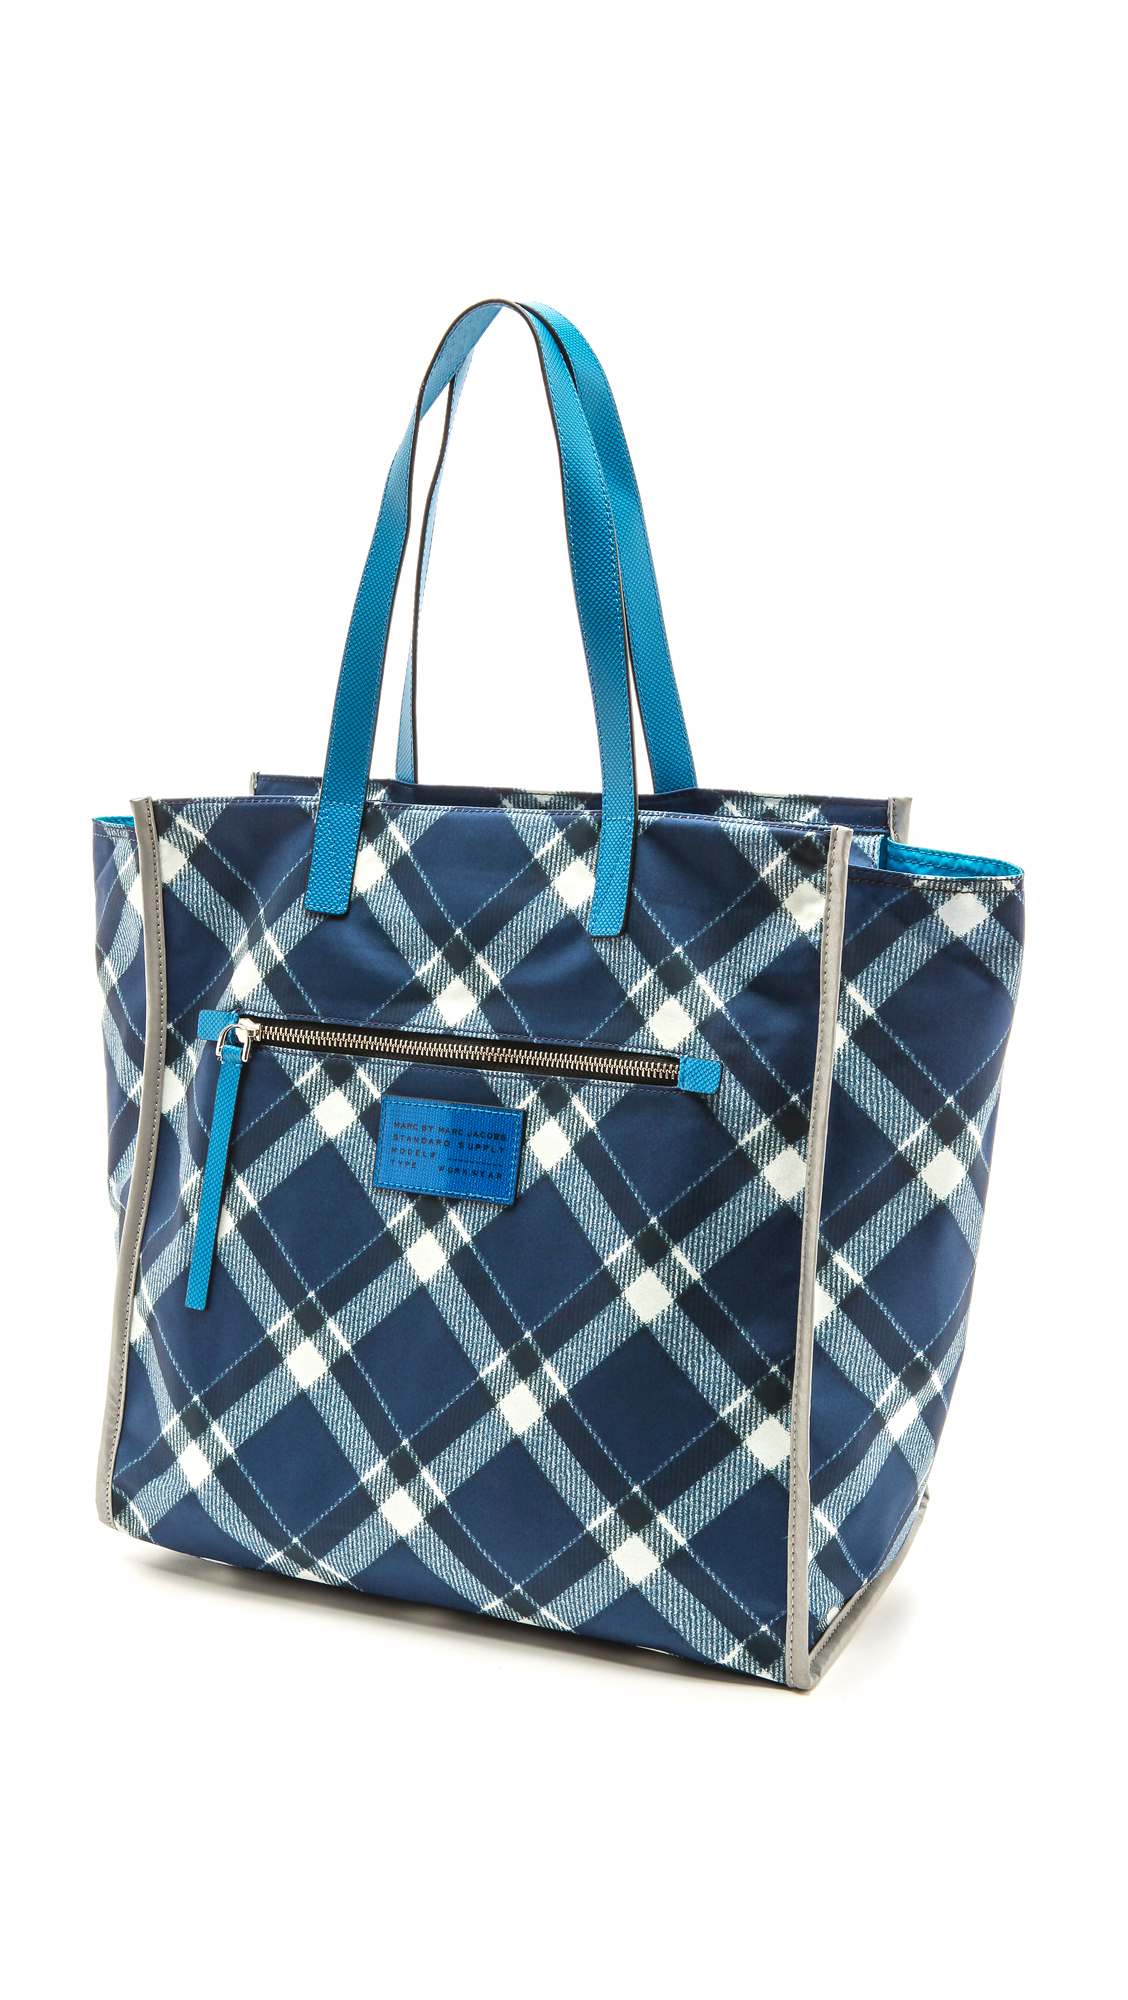 Lyst - Marc By Marc Jacobs Marc It Plaid Nylon Tote Bag in Blue